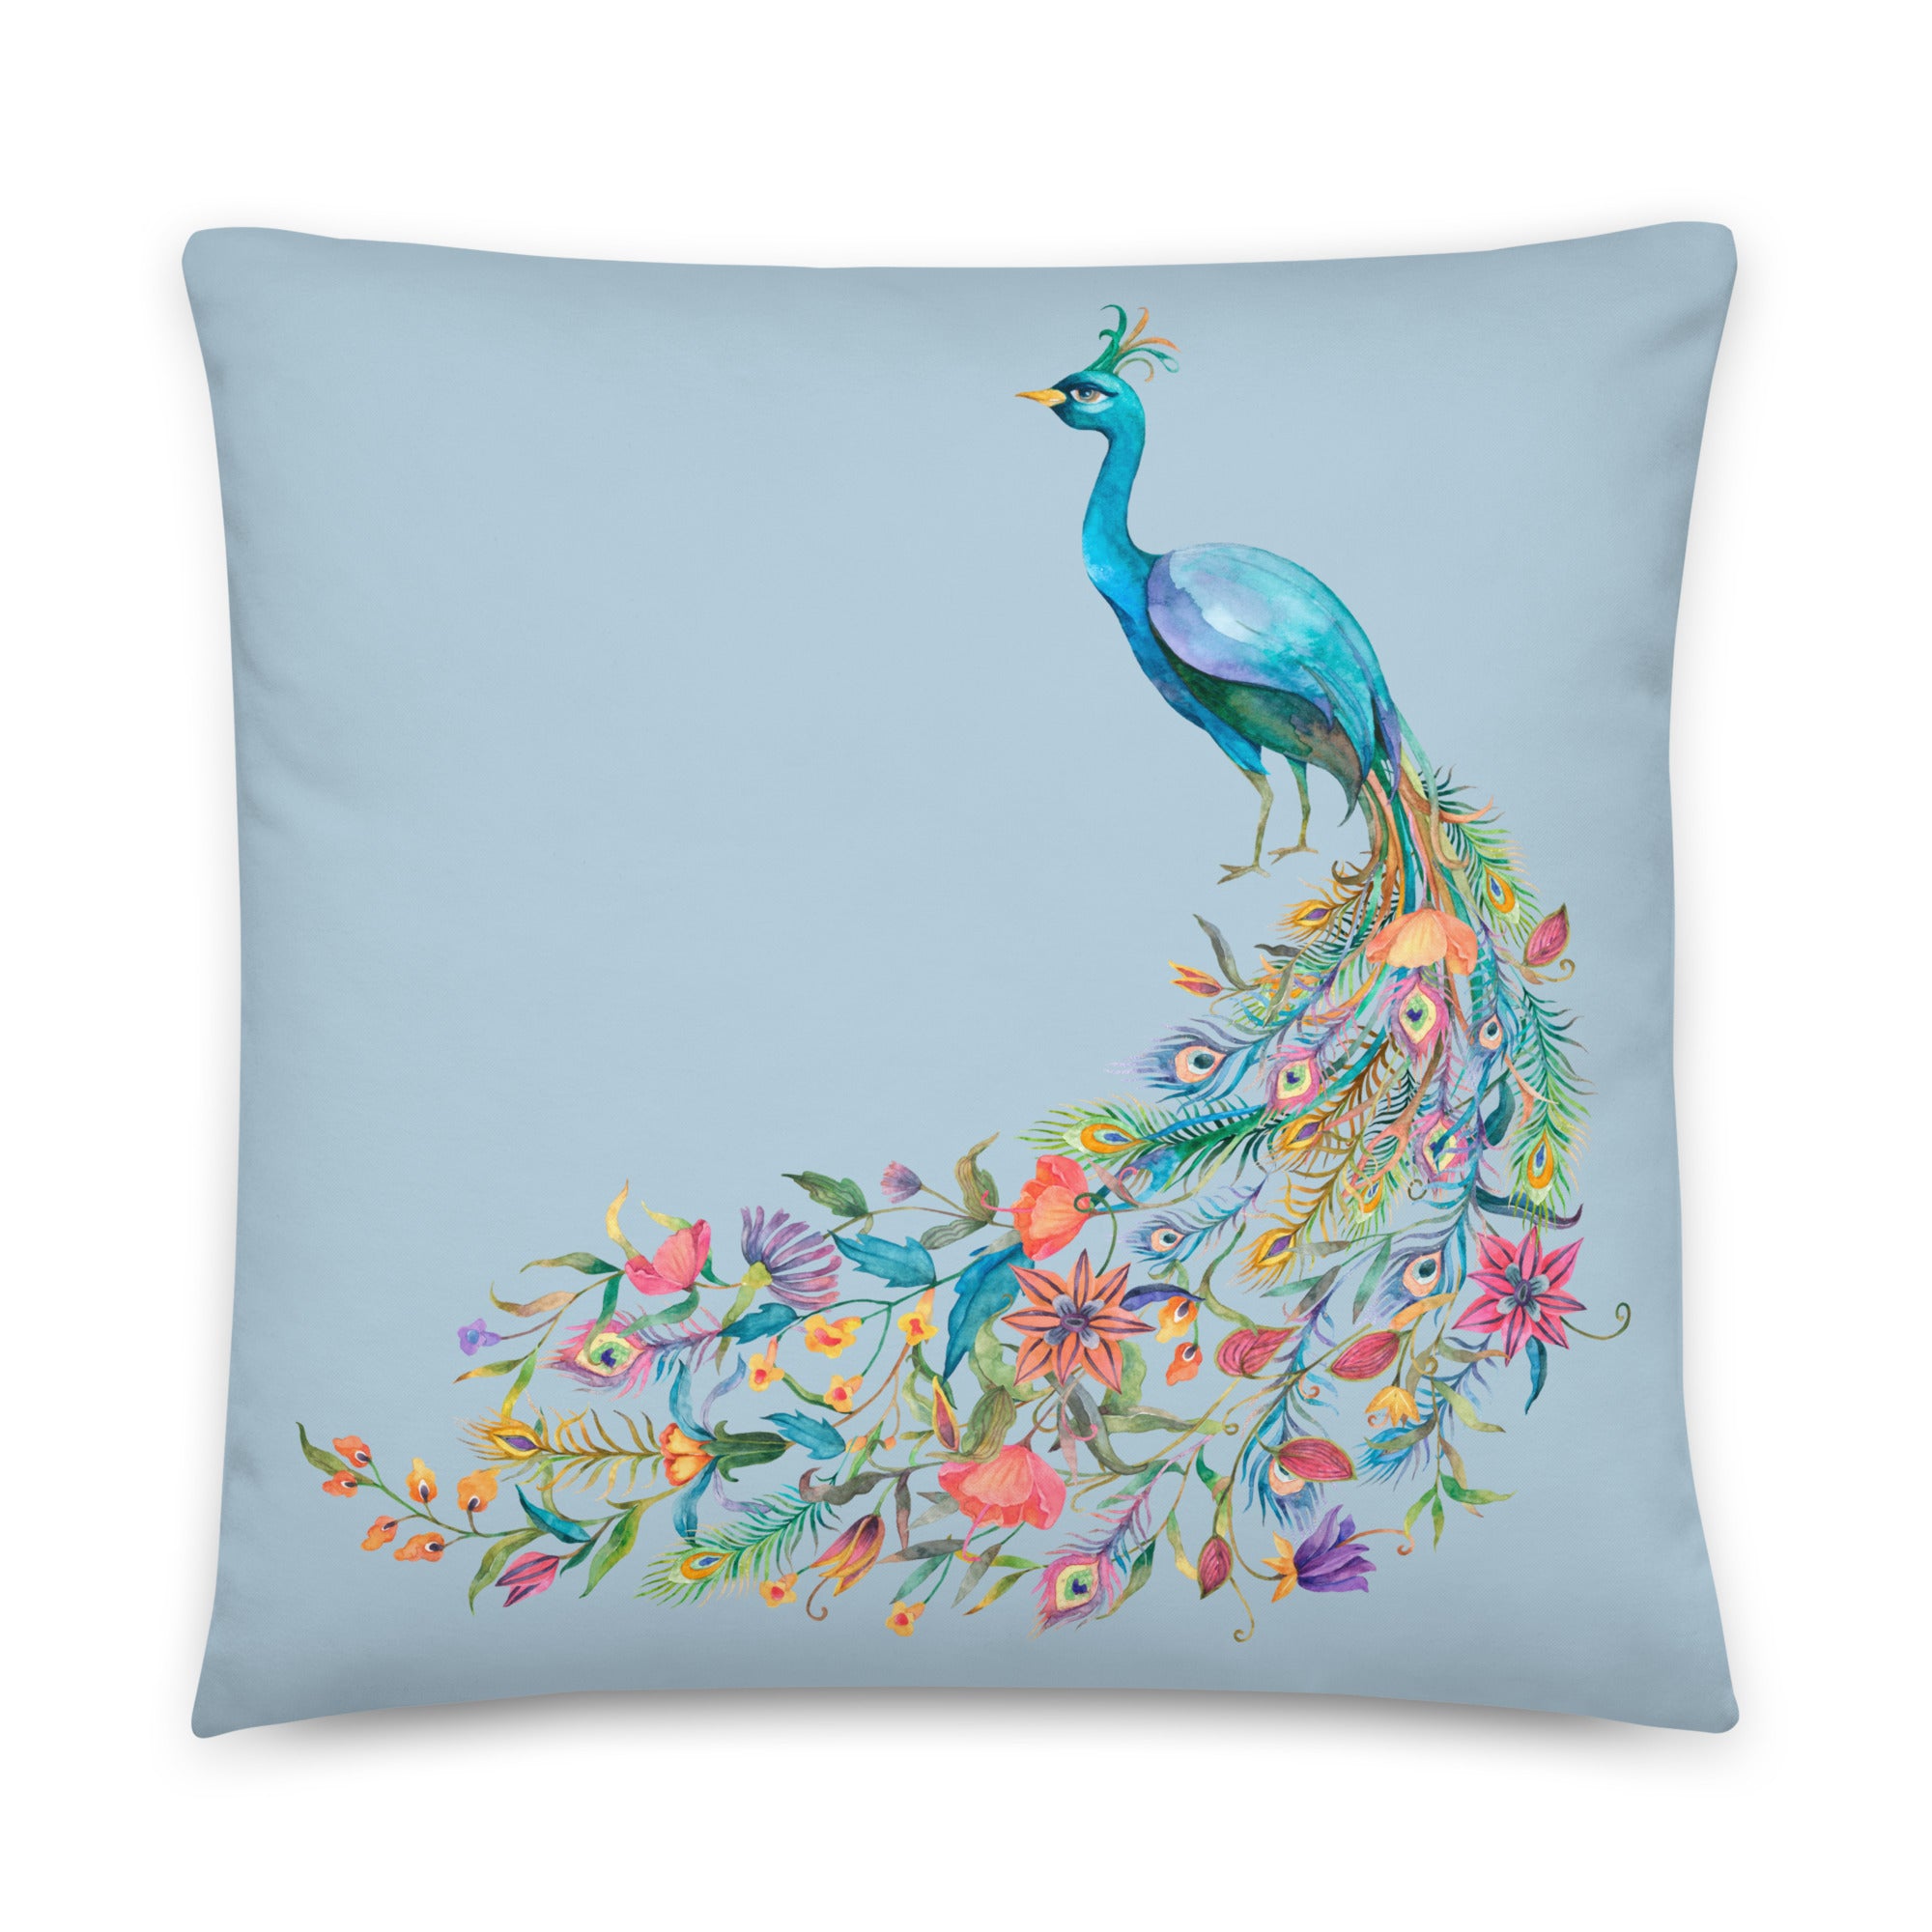 Featuring a captivating peacock graphic print in vibrant shades of blue, these pillows effortlessly blend artistry with comfort.